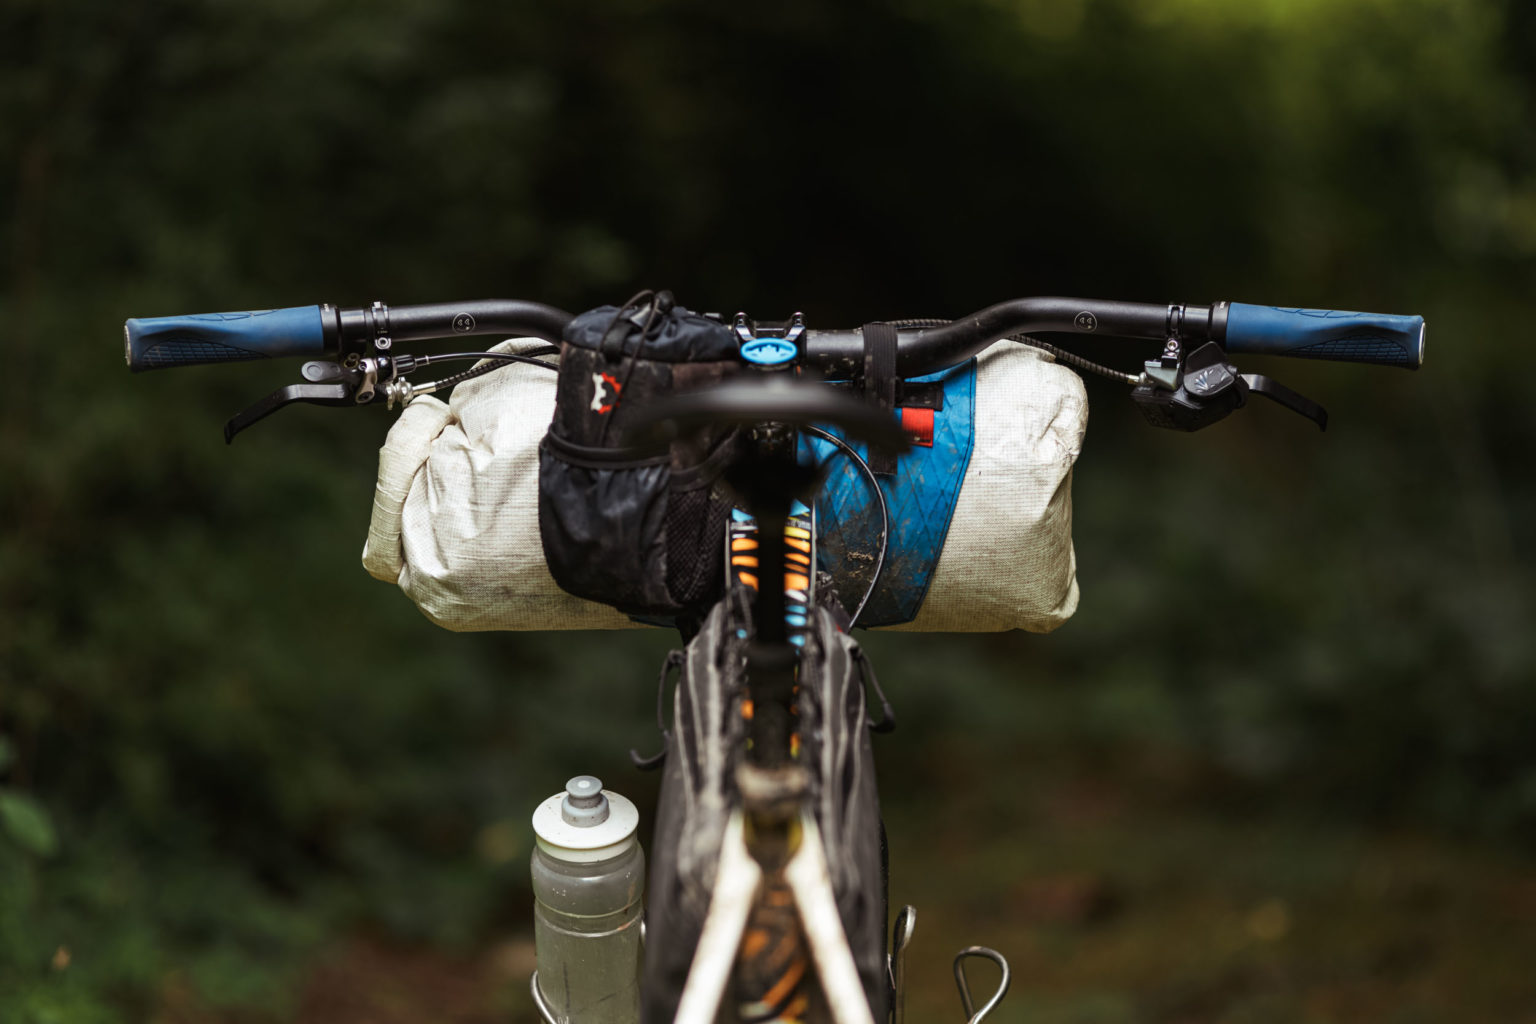 Mountain bike drop bars don’t have space to attach backpacking gear vs. drop bars that do.